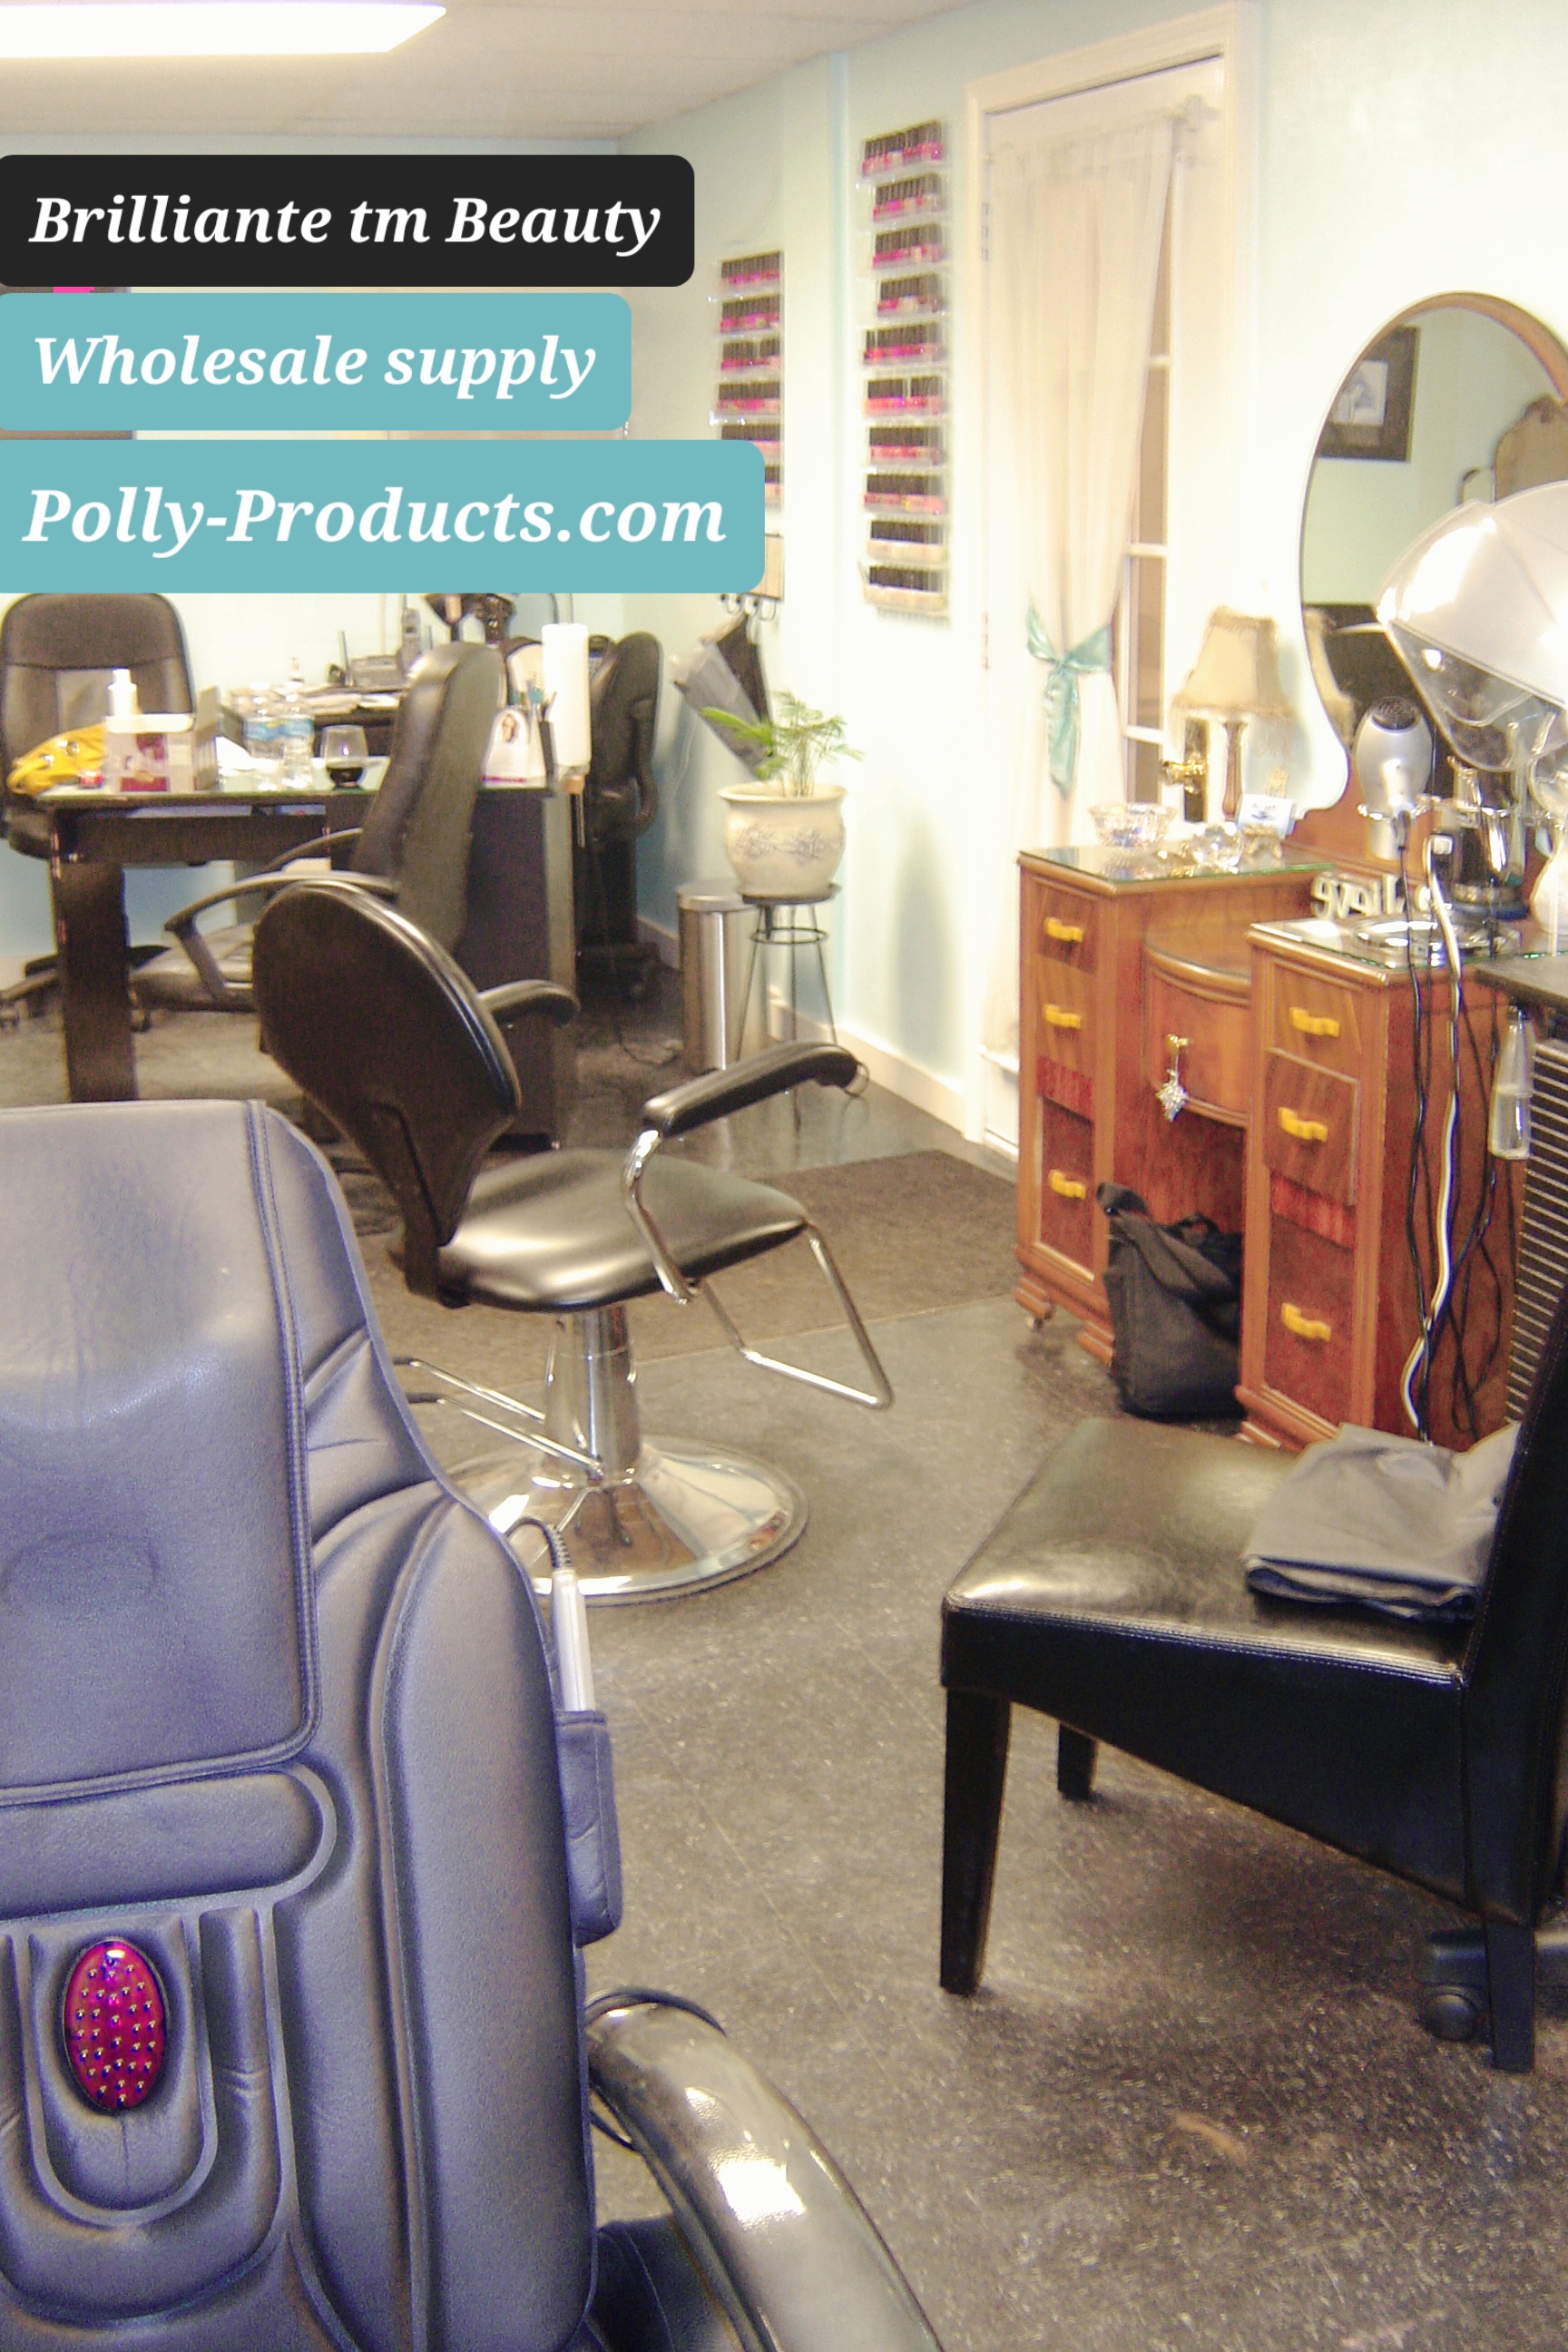 Salon Supply Brilliante Beauty polly products